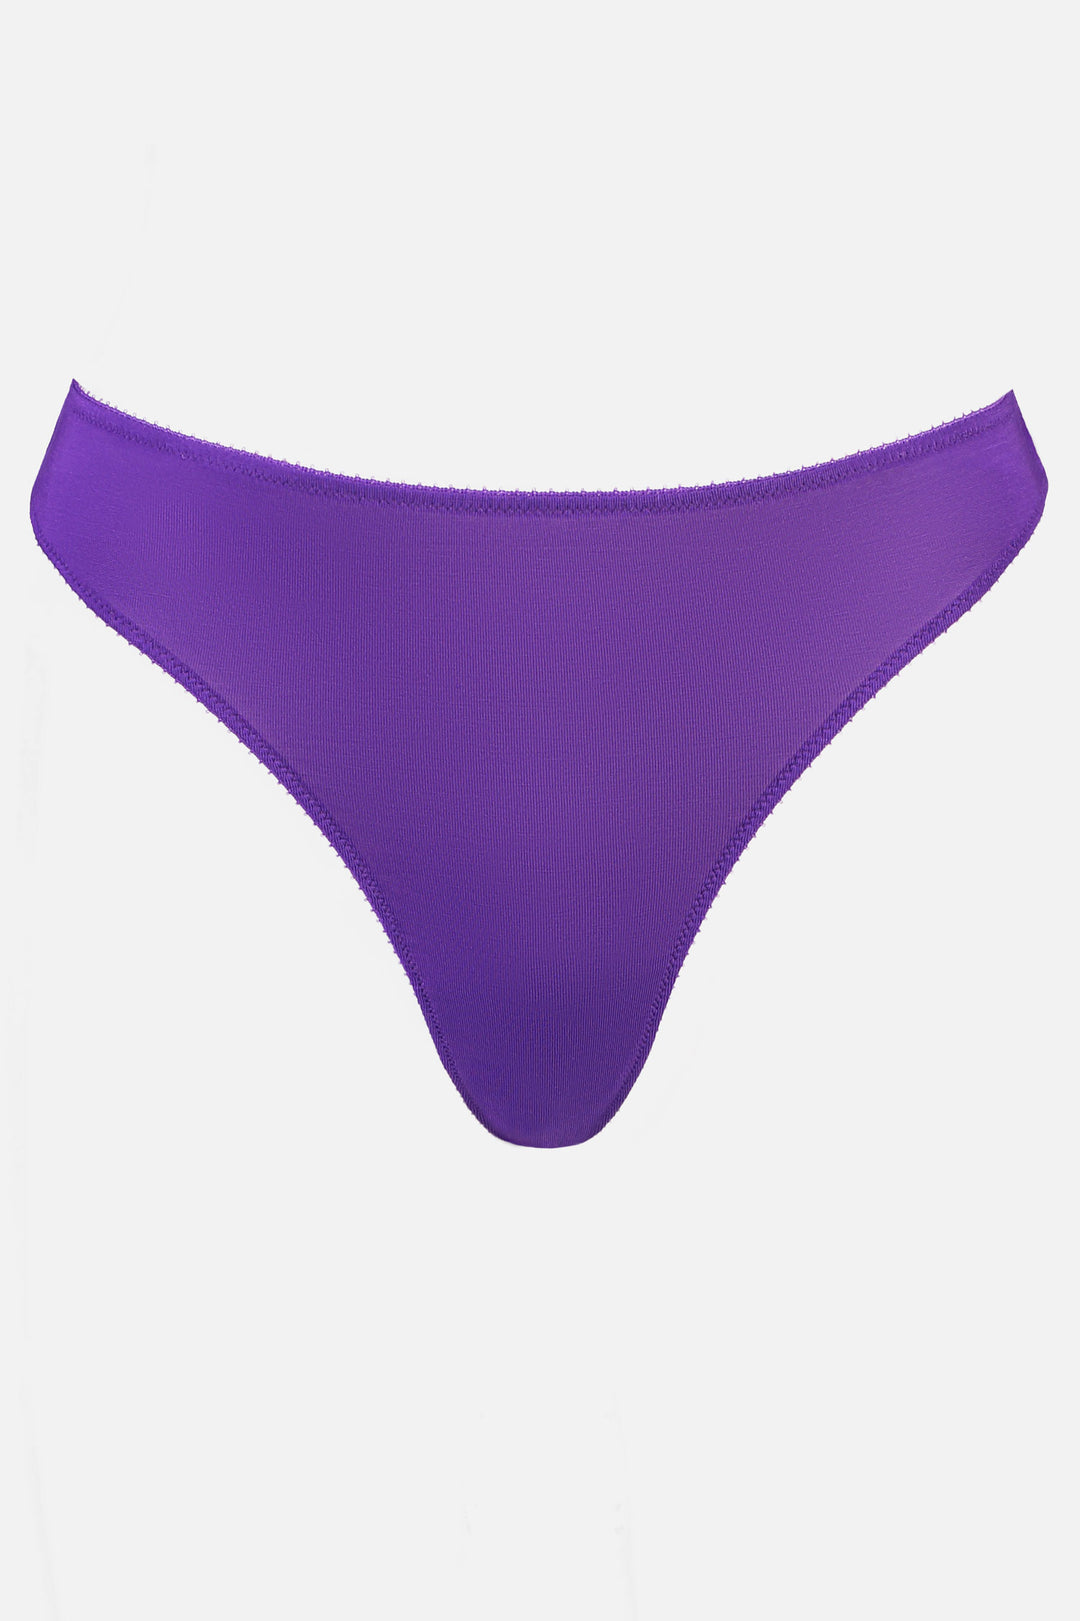 Videris Lingerie thong in purple TENCEL™ a comfortable mid-rise style cut to follow the natural curve of your hips